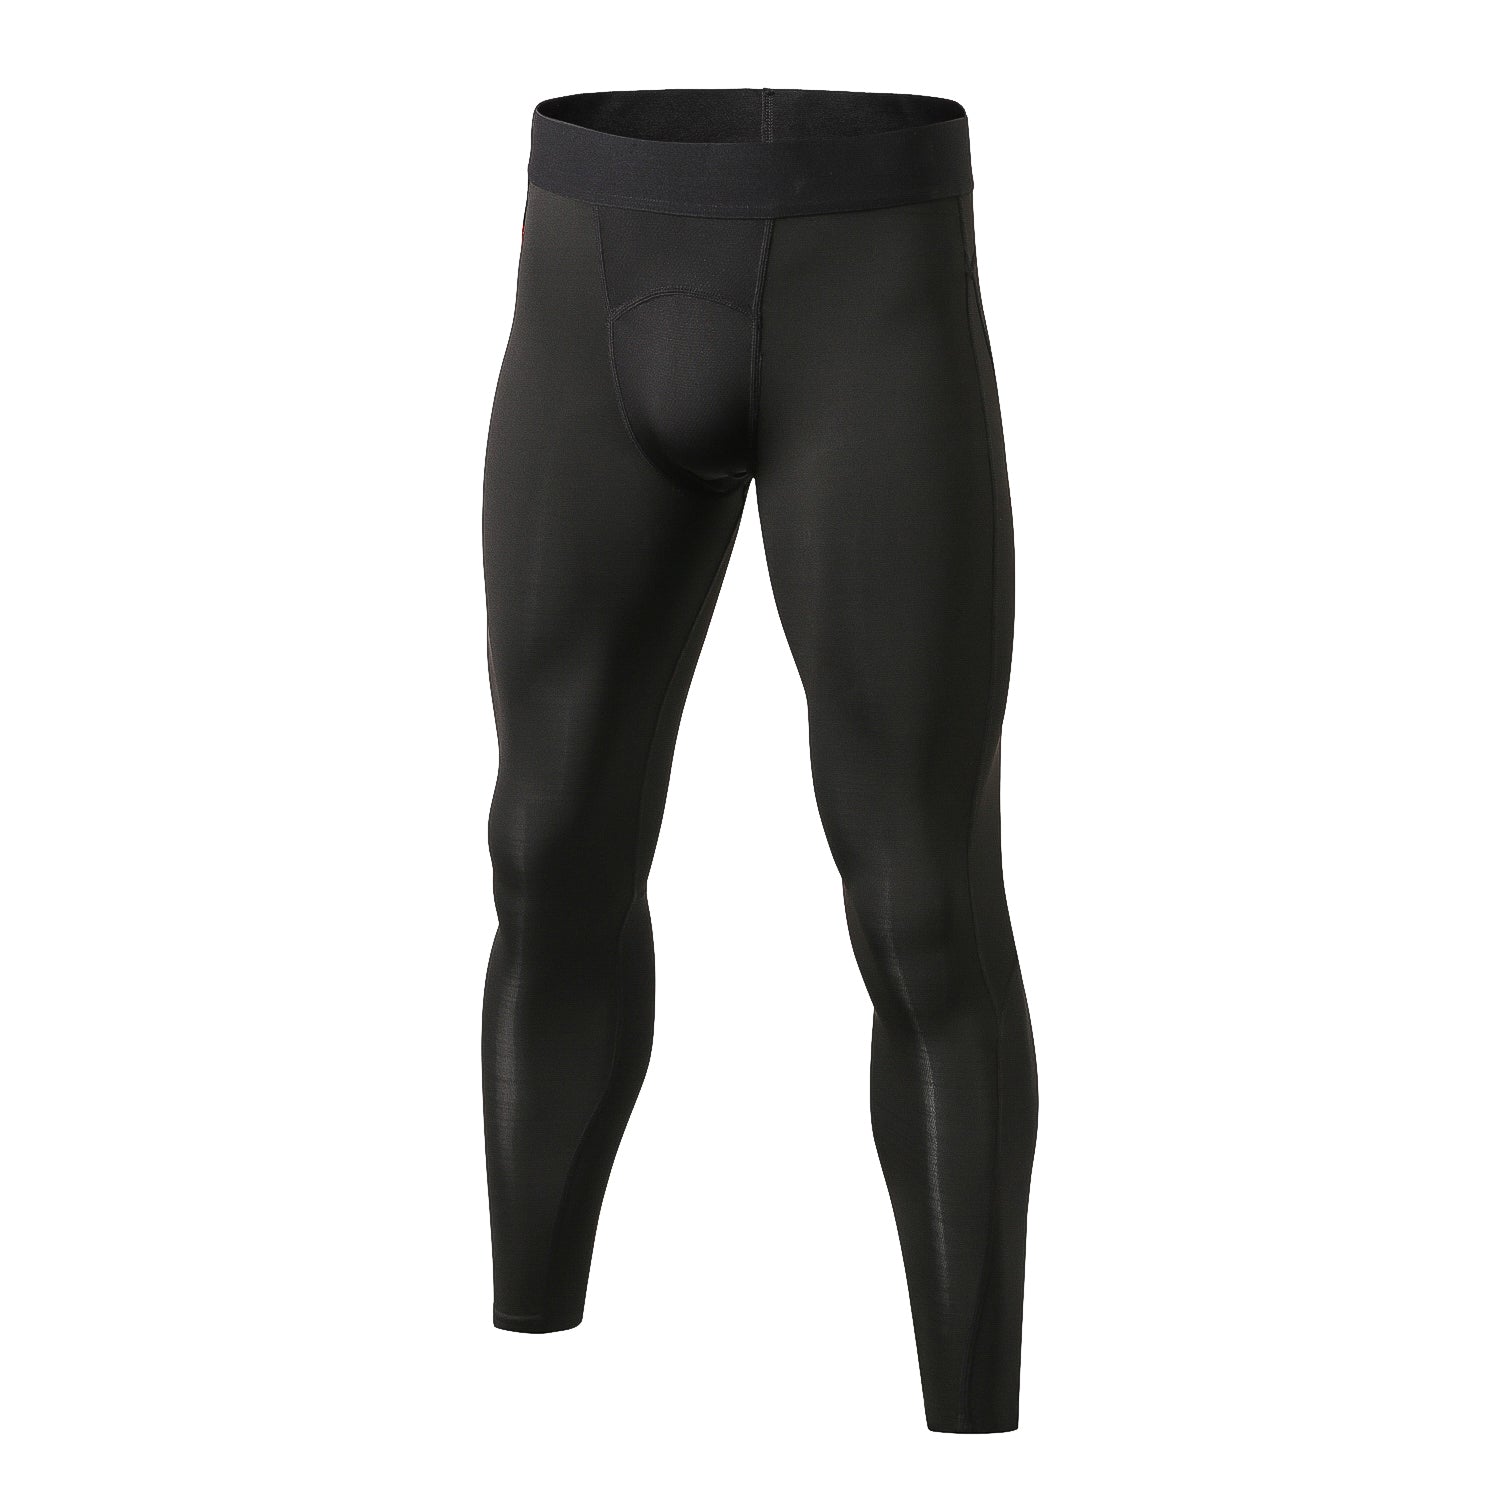 Professional Compression Pants Outdoor Sports Fitness Running Training Tight  Pants Basketball Football Men's Leggings